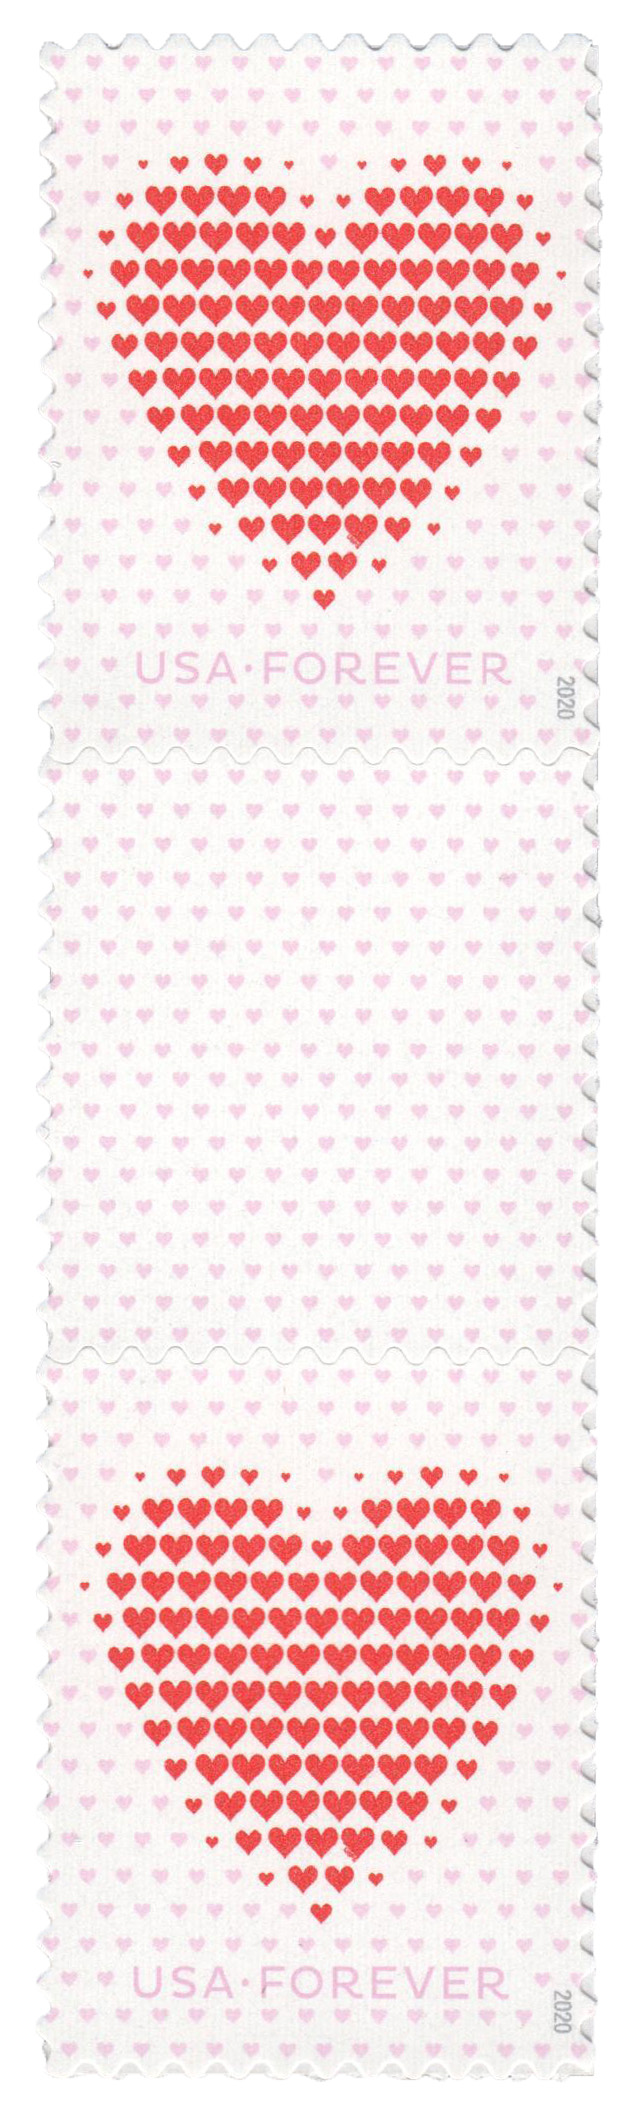 Forever Stamps Made of Hearts 2020 Stamps Coil of 100 PCS/Roll